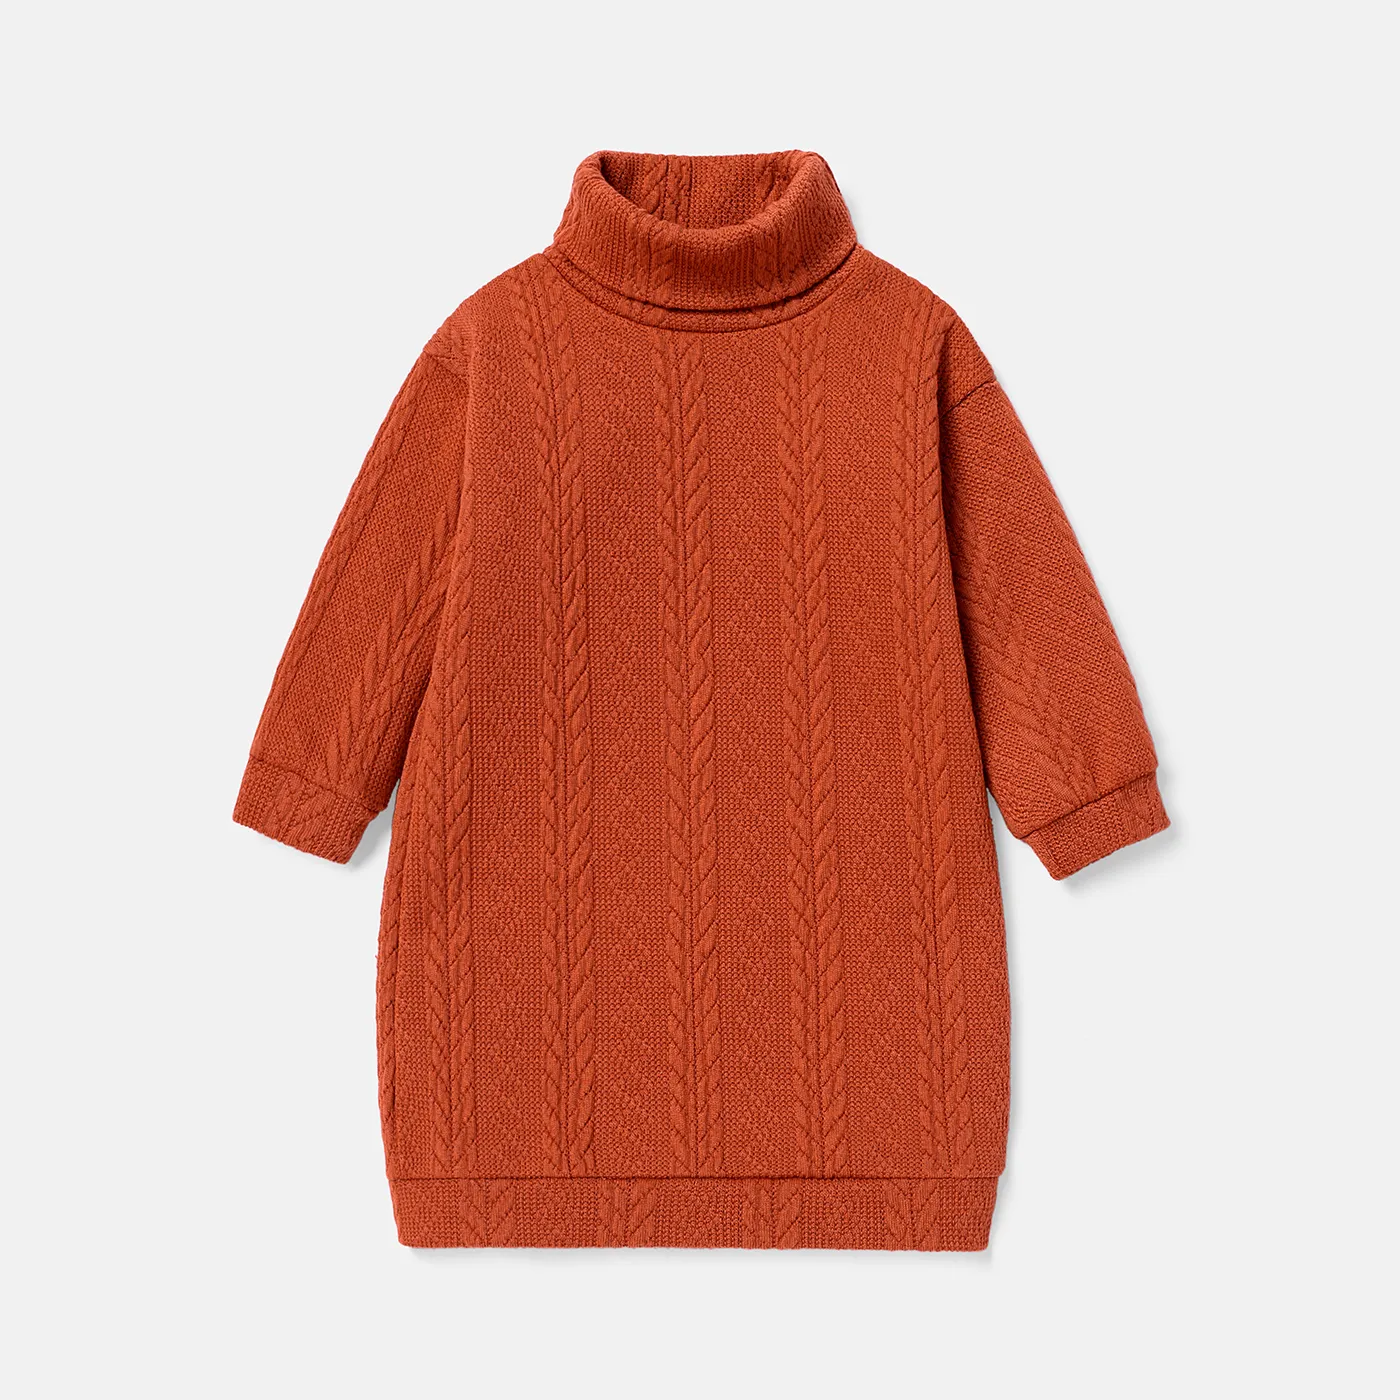 

Toddler Girl Solid Color Cable Knit Textured Turtleneck Sweater Dress